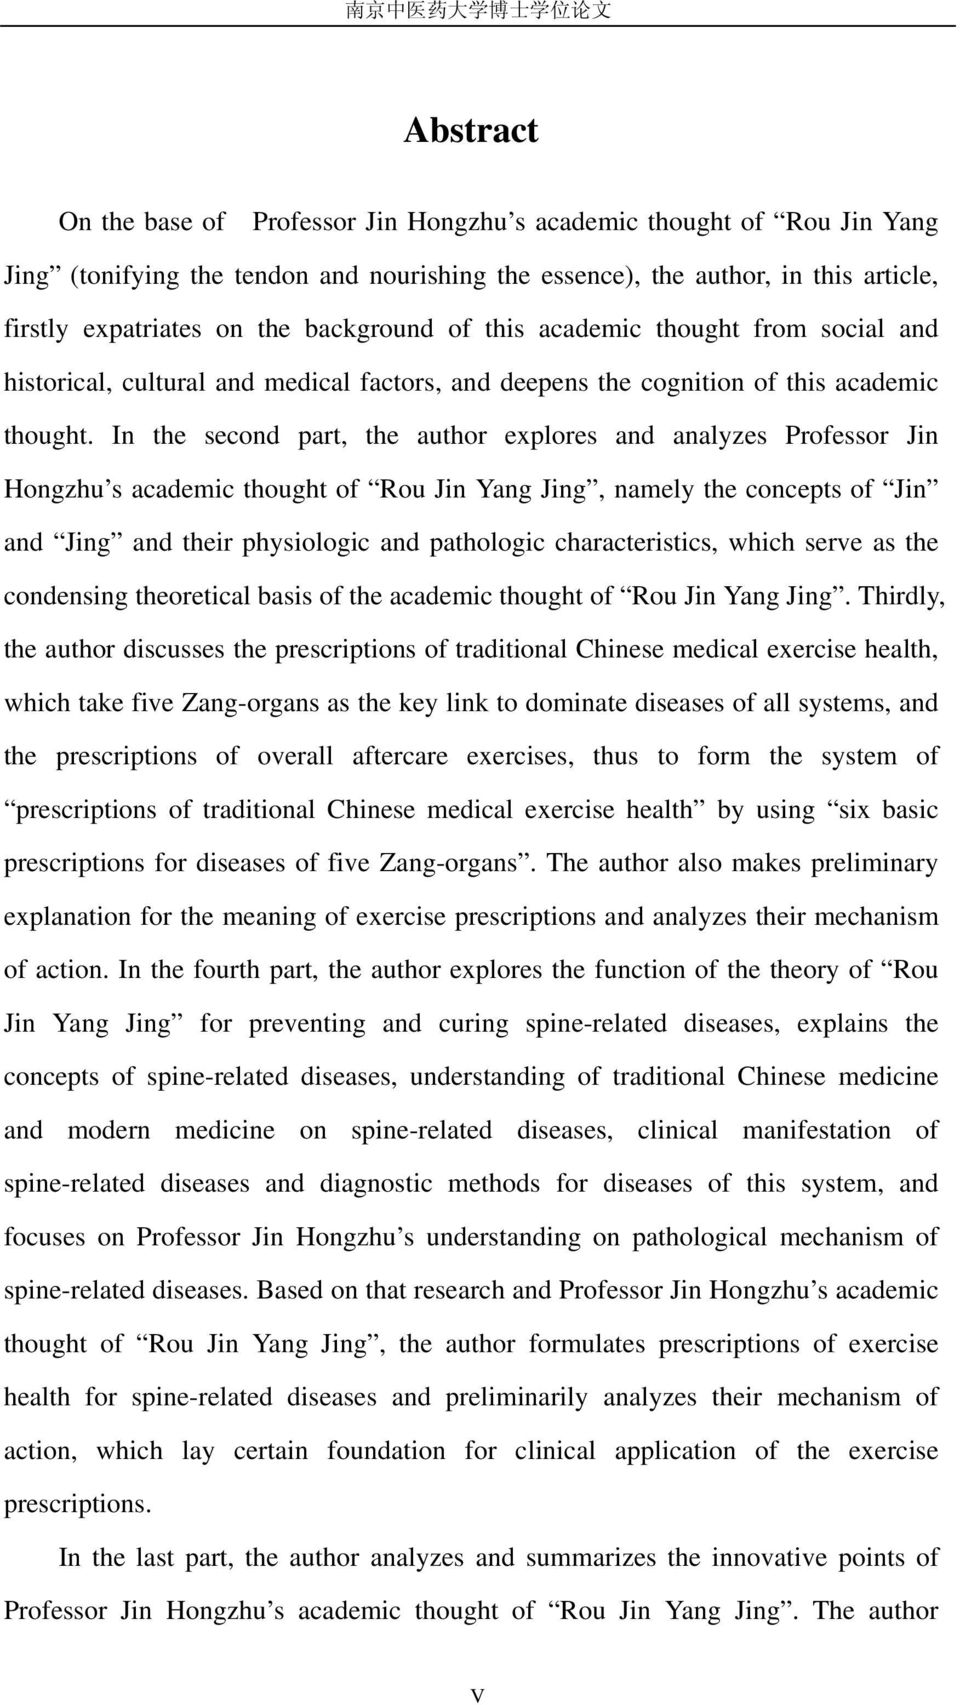 In the second part, the author explores and analyzes Professor Jin Hongzhu s academic thought of Rou Jin Yang Jing, namely the concepts of Jin and Jing and their physiologic and pathologic